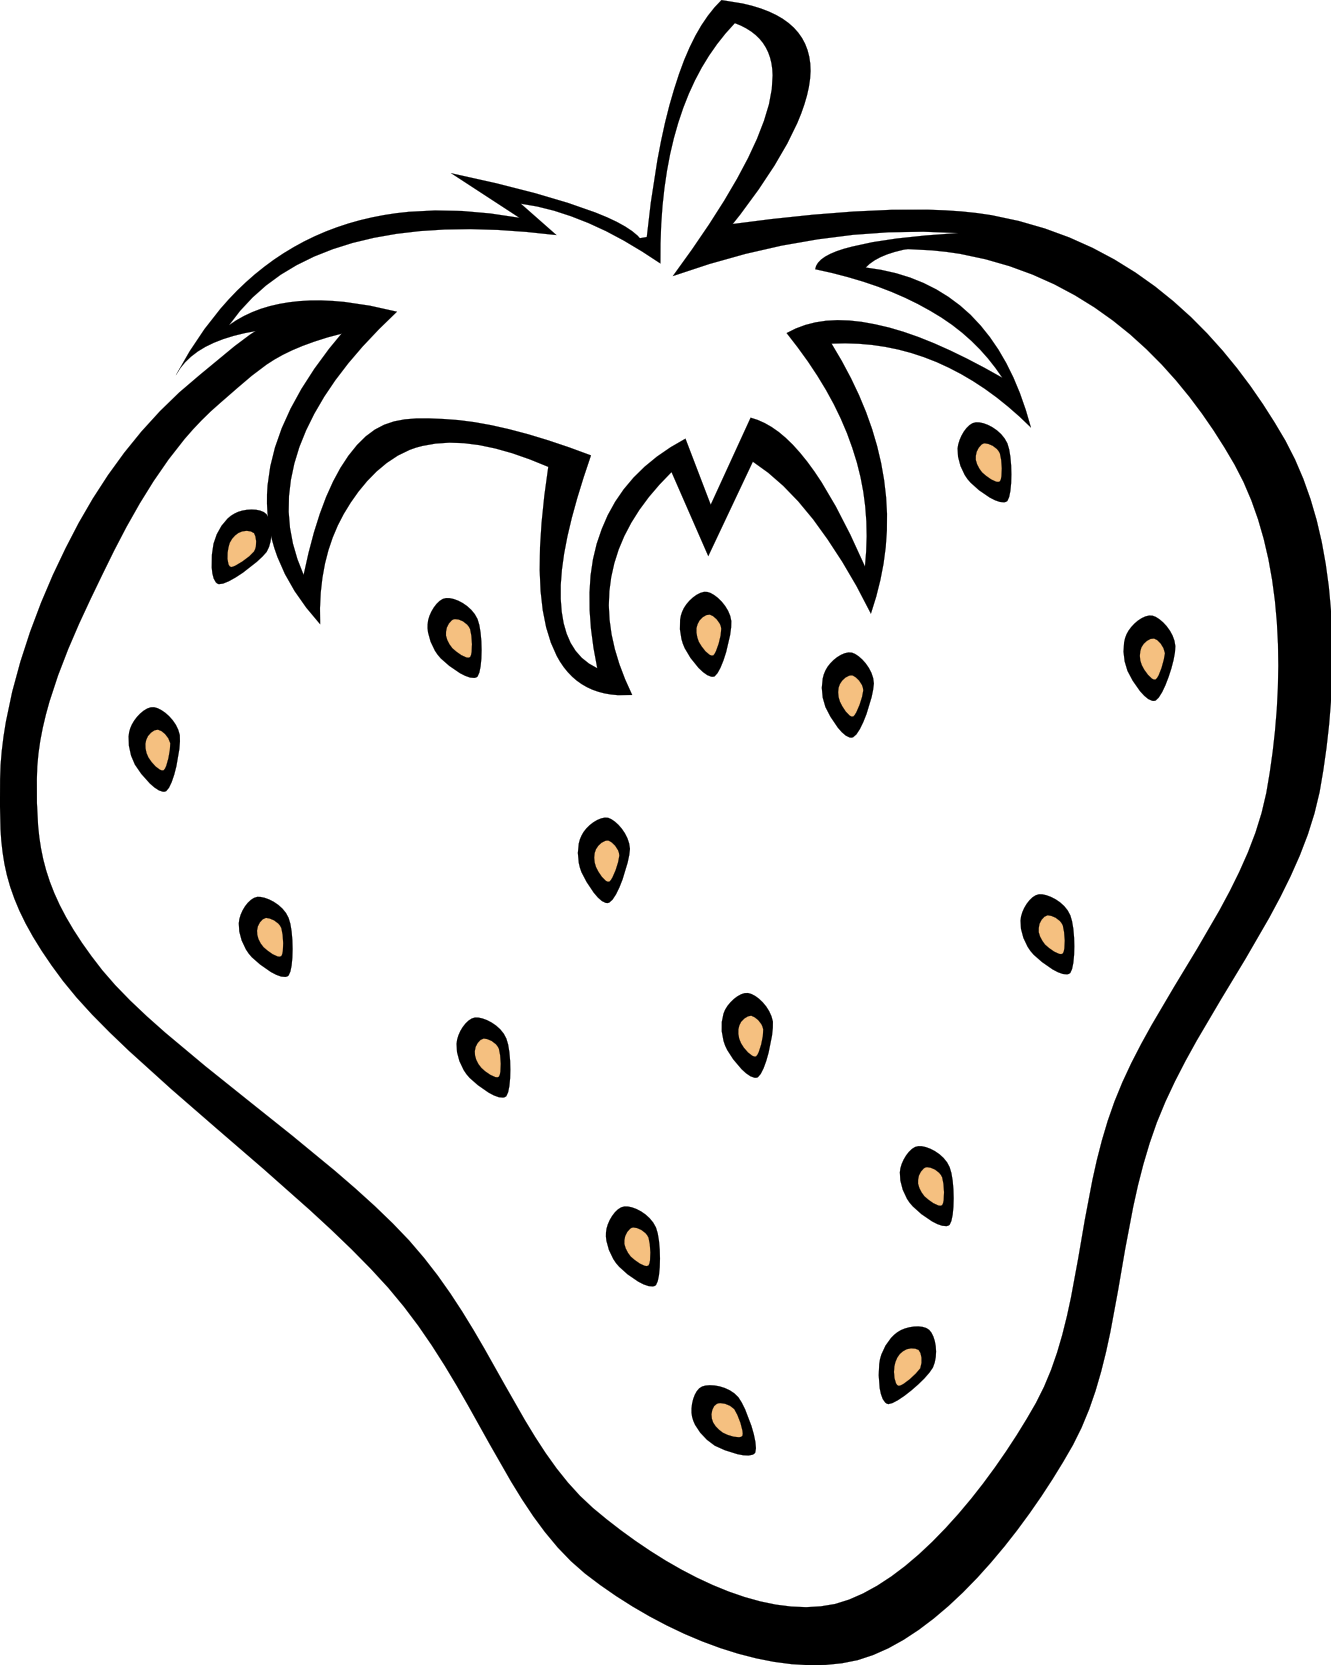 Fruit And Veg PNG Black And White - 54874